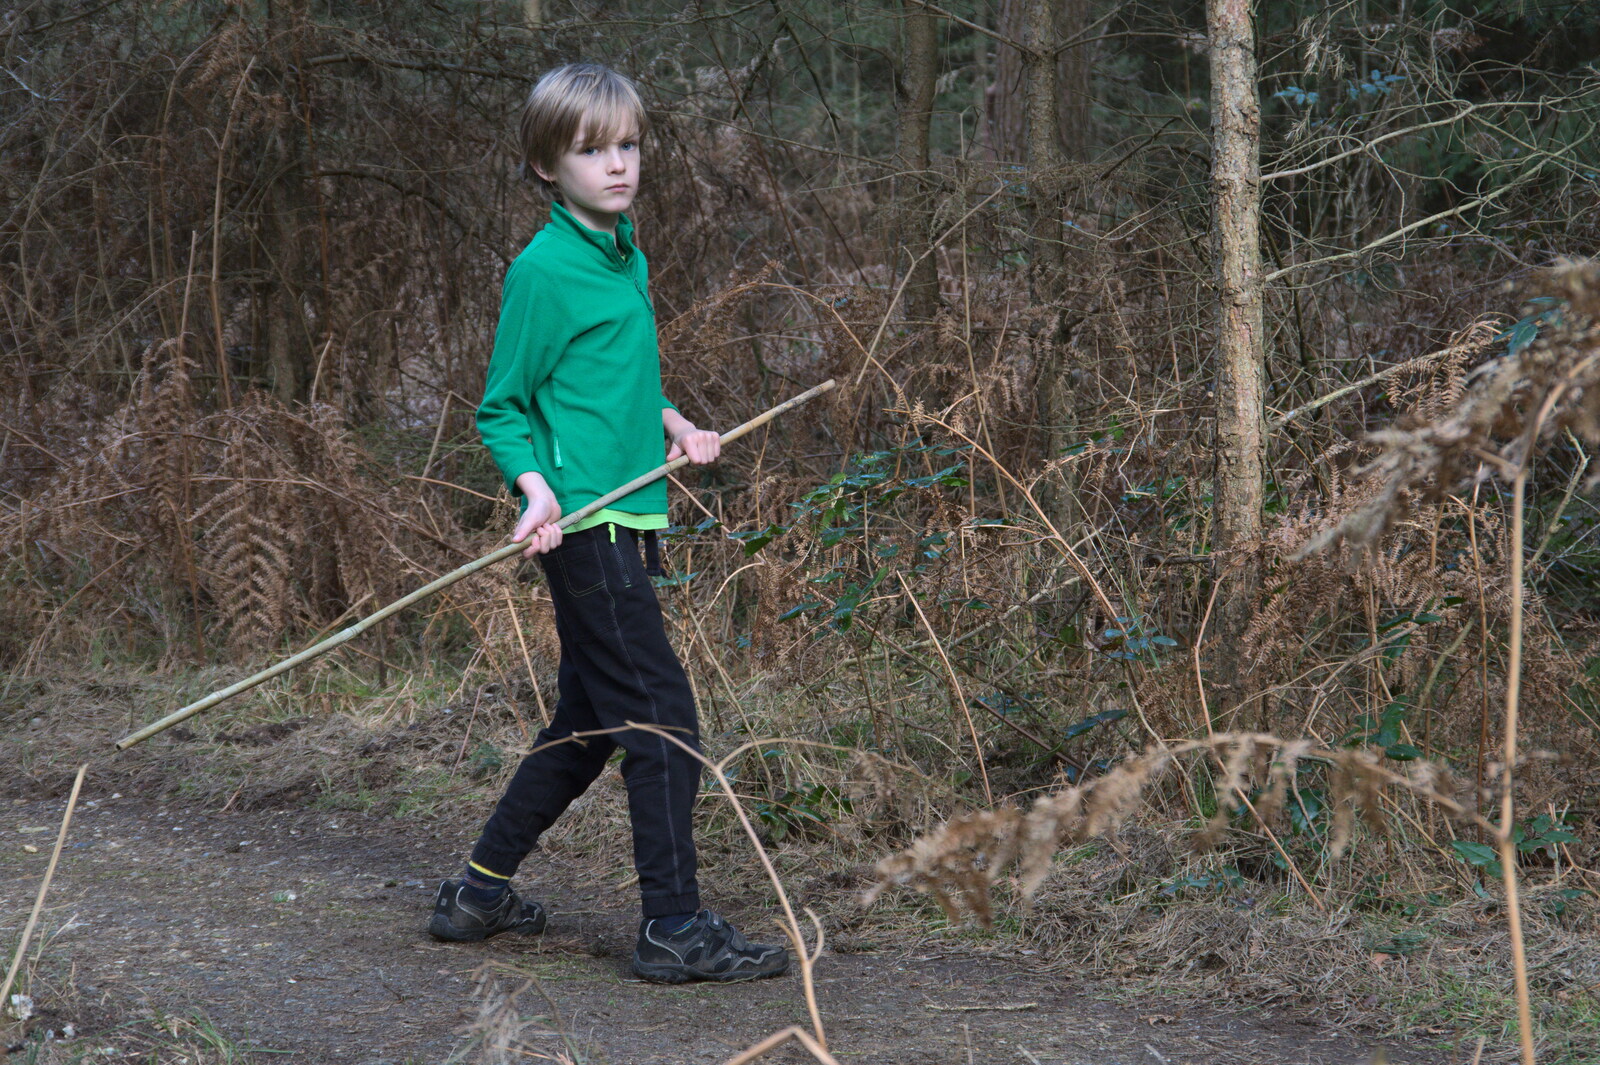 Harry pokes stuff with his stick from A Trip to High Lodge, Brandon, Suffolk - 7th March 2020